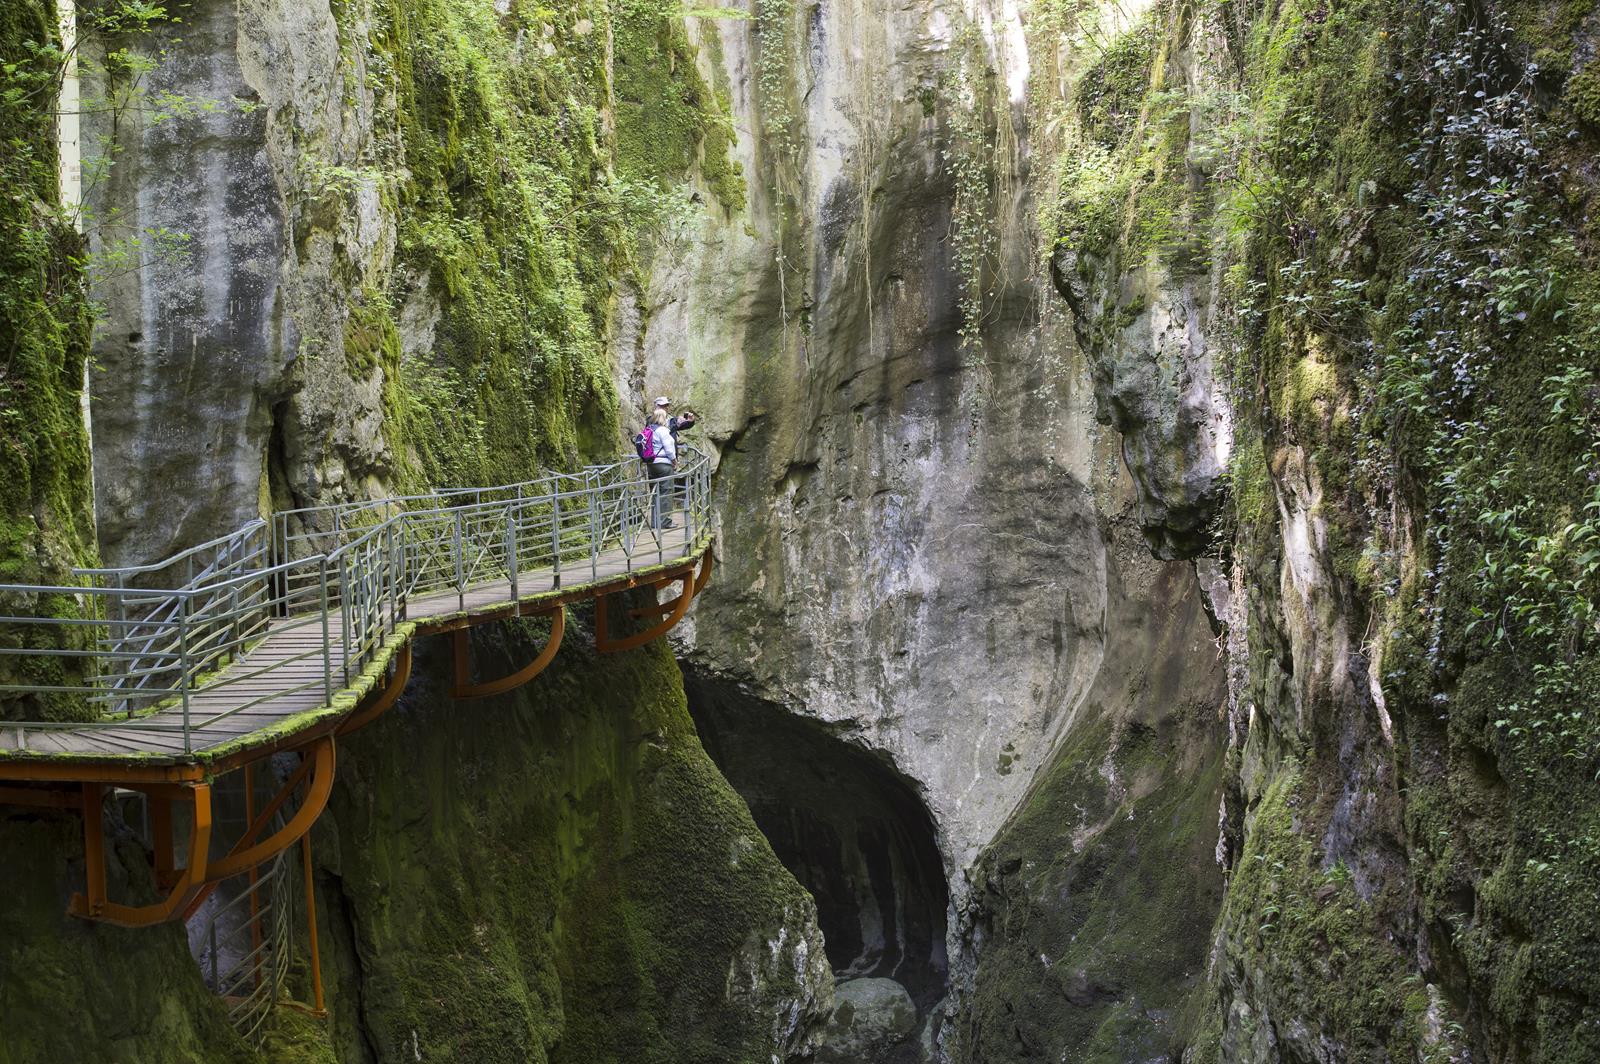 The Gorges du Fier - Lovagny